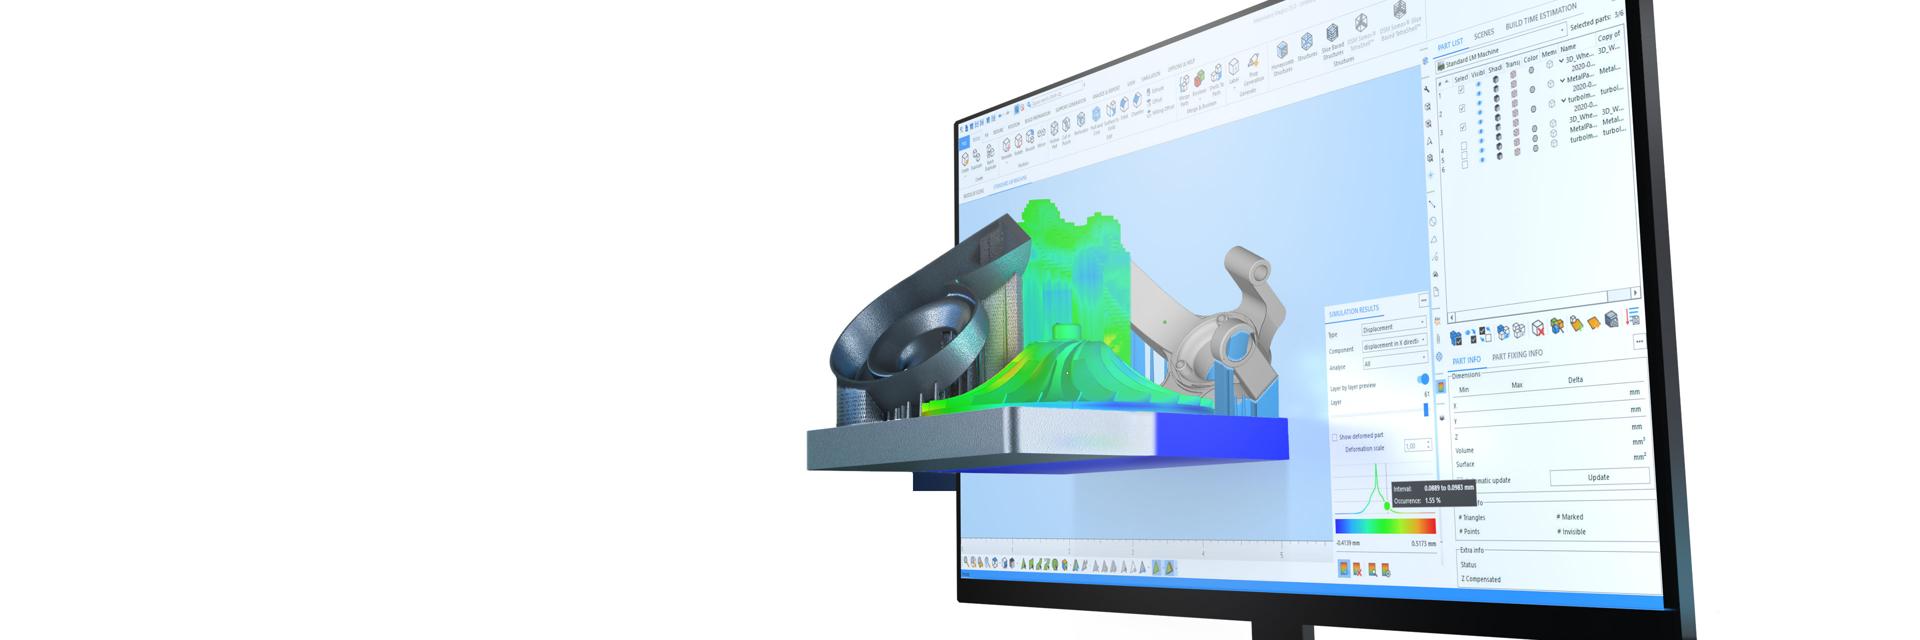 3D model popping out of a screen with Magics software